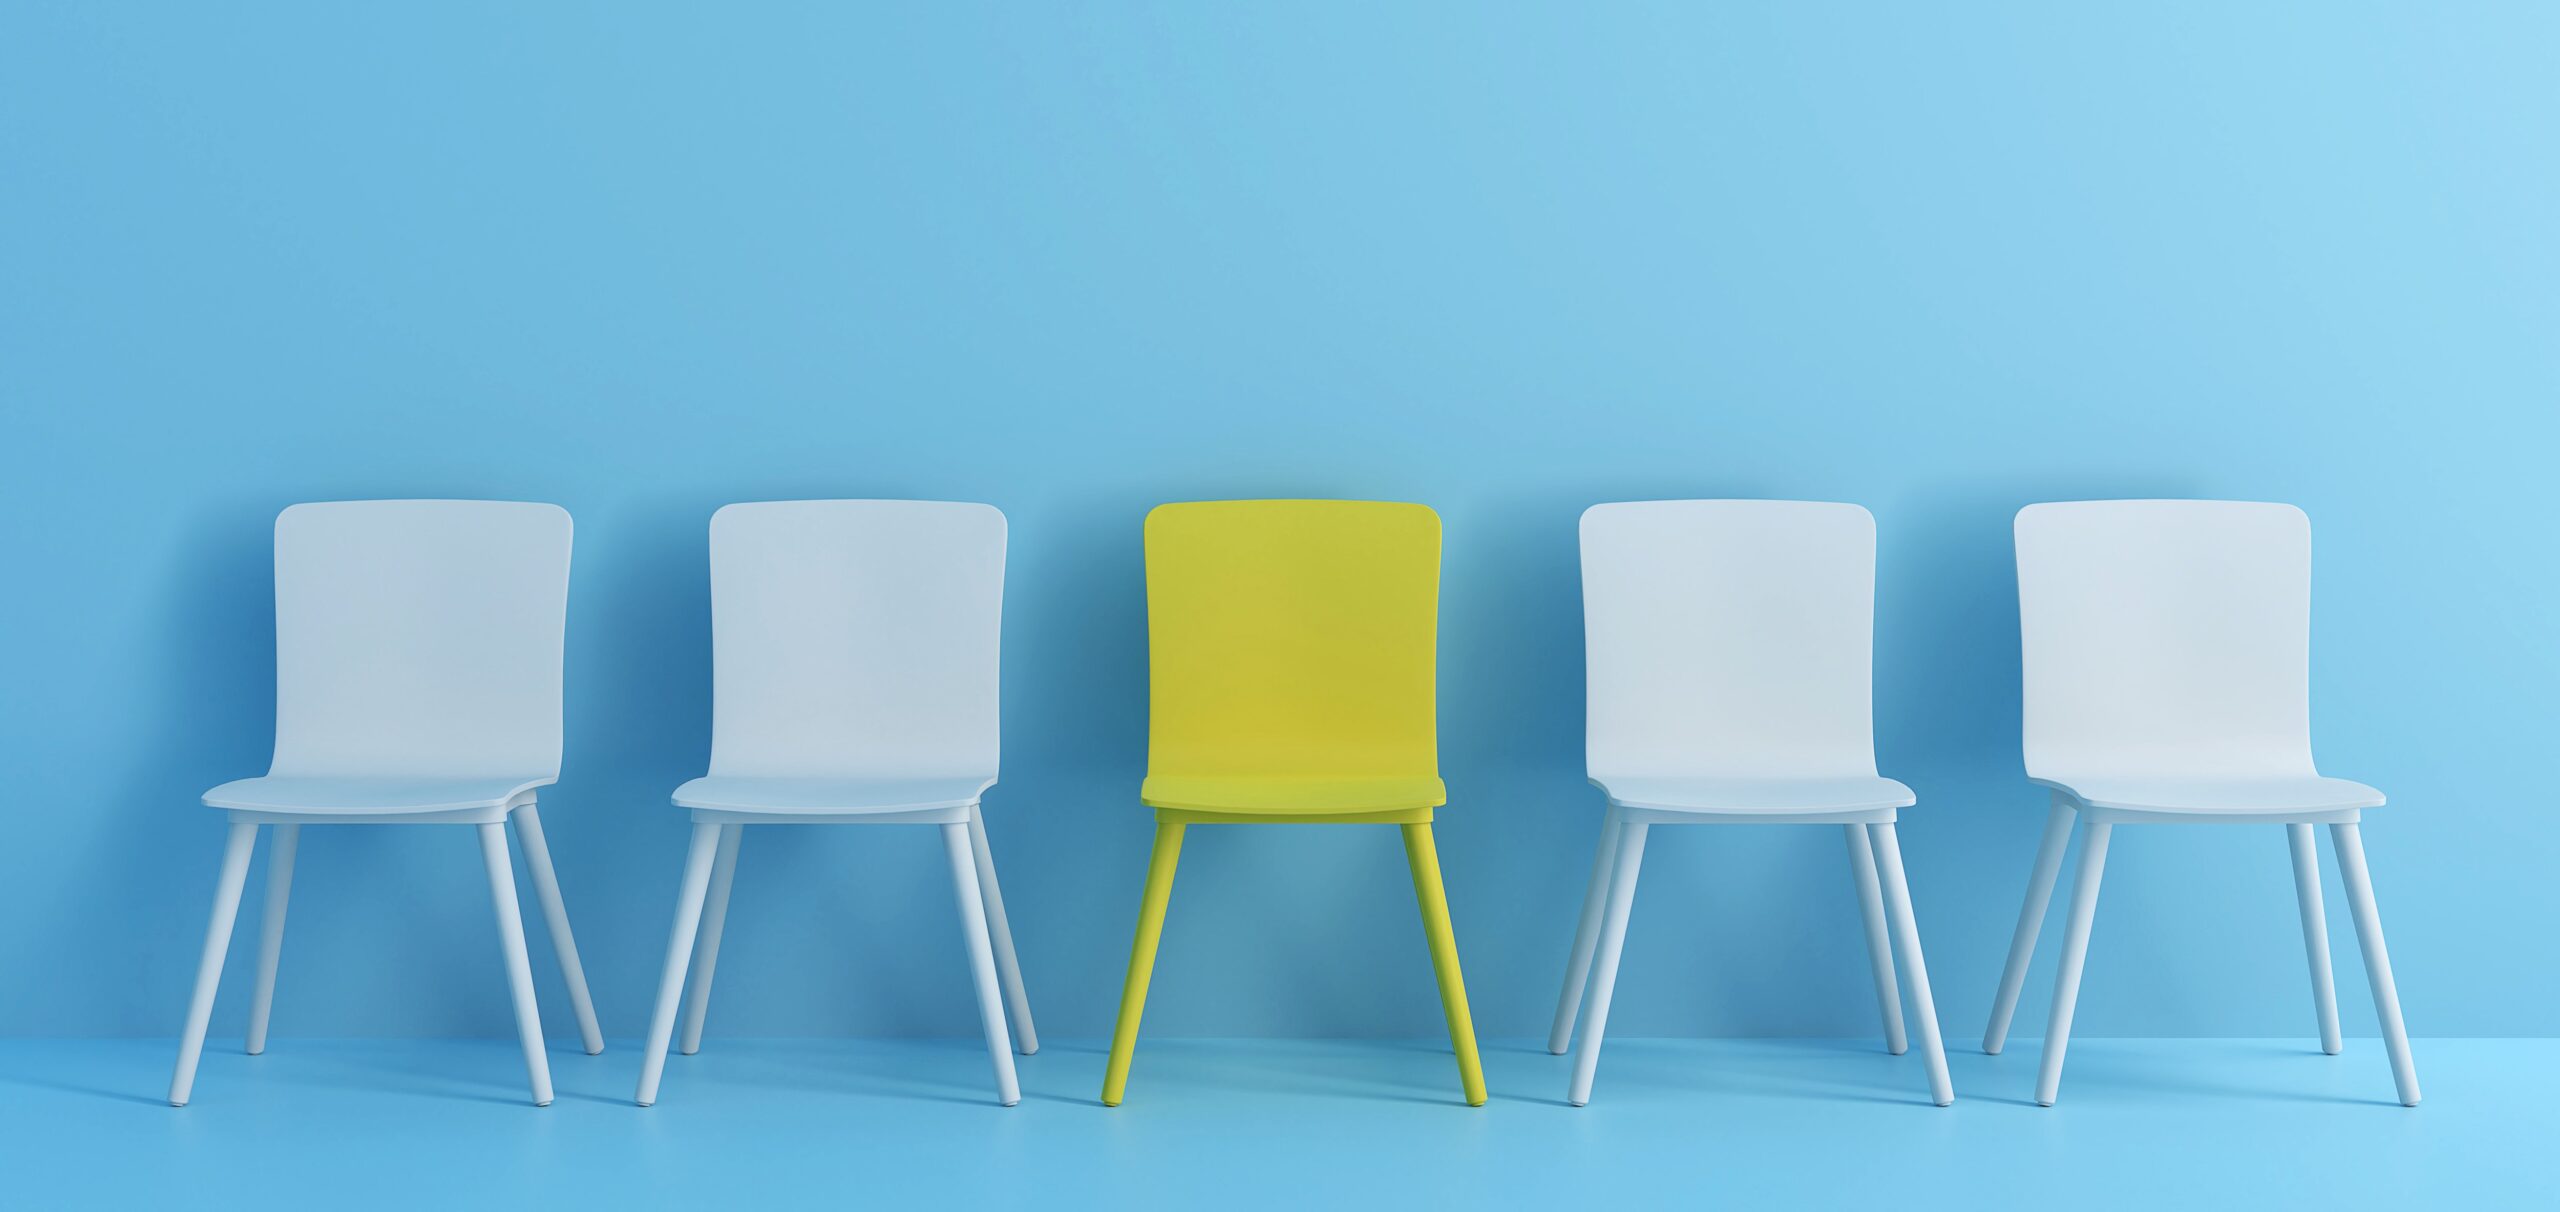 outstanding yellow chair among light blue chair. Chairs with one